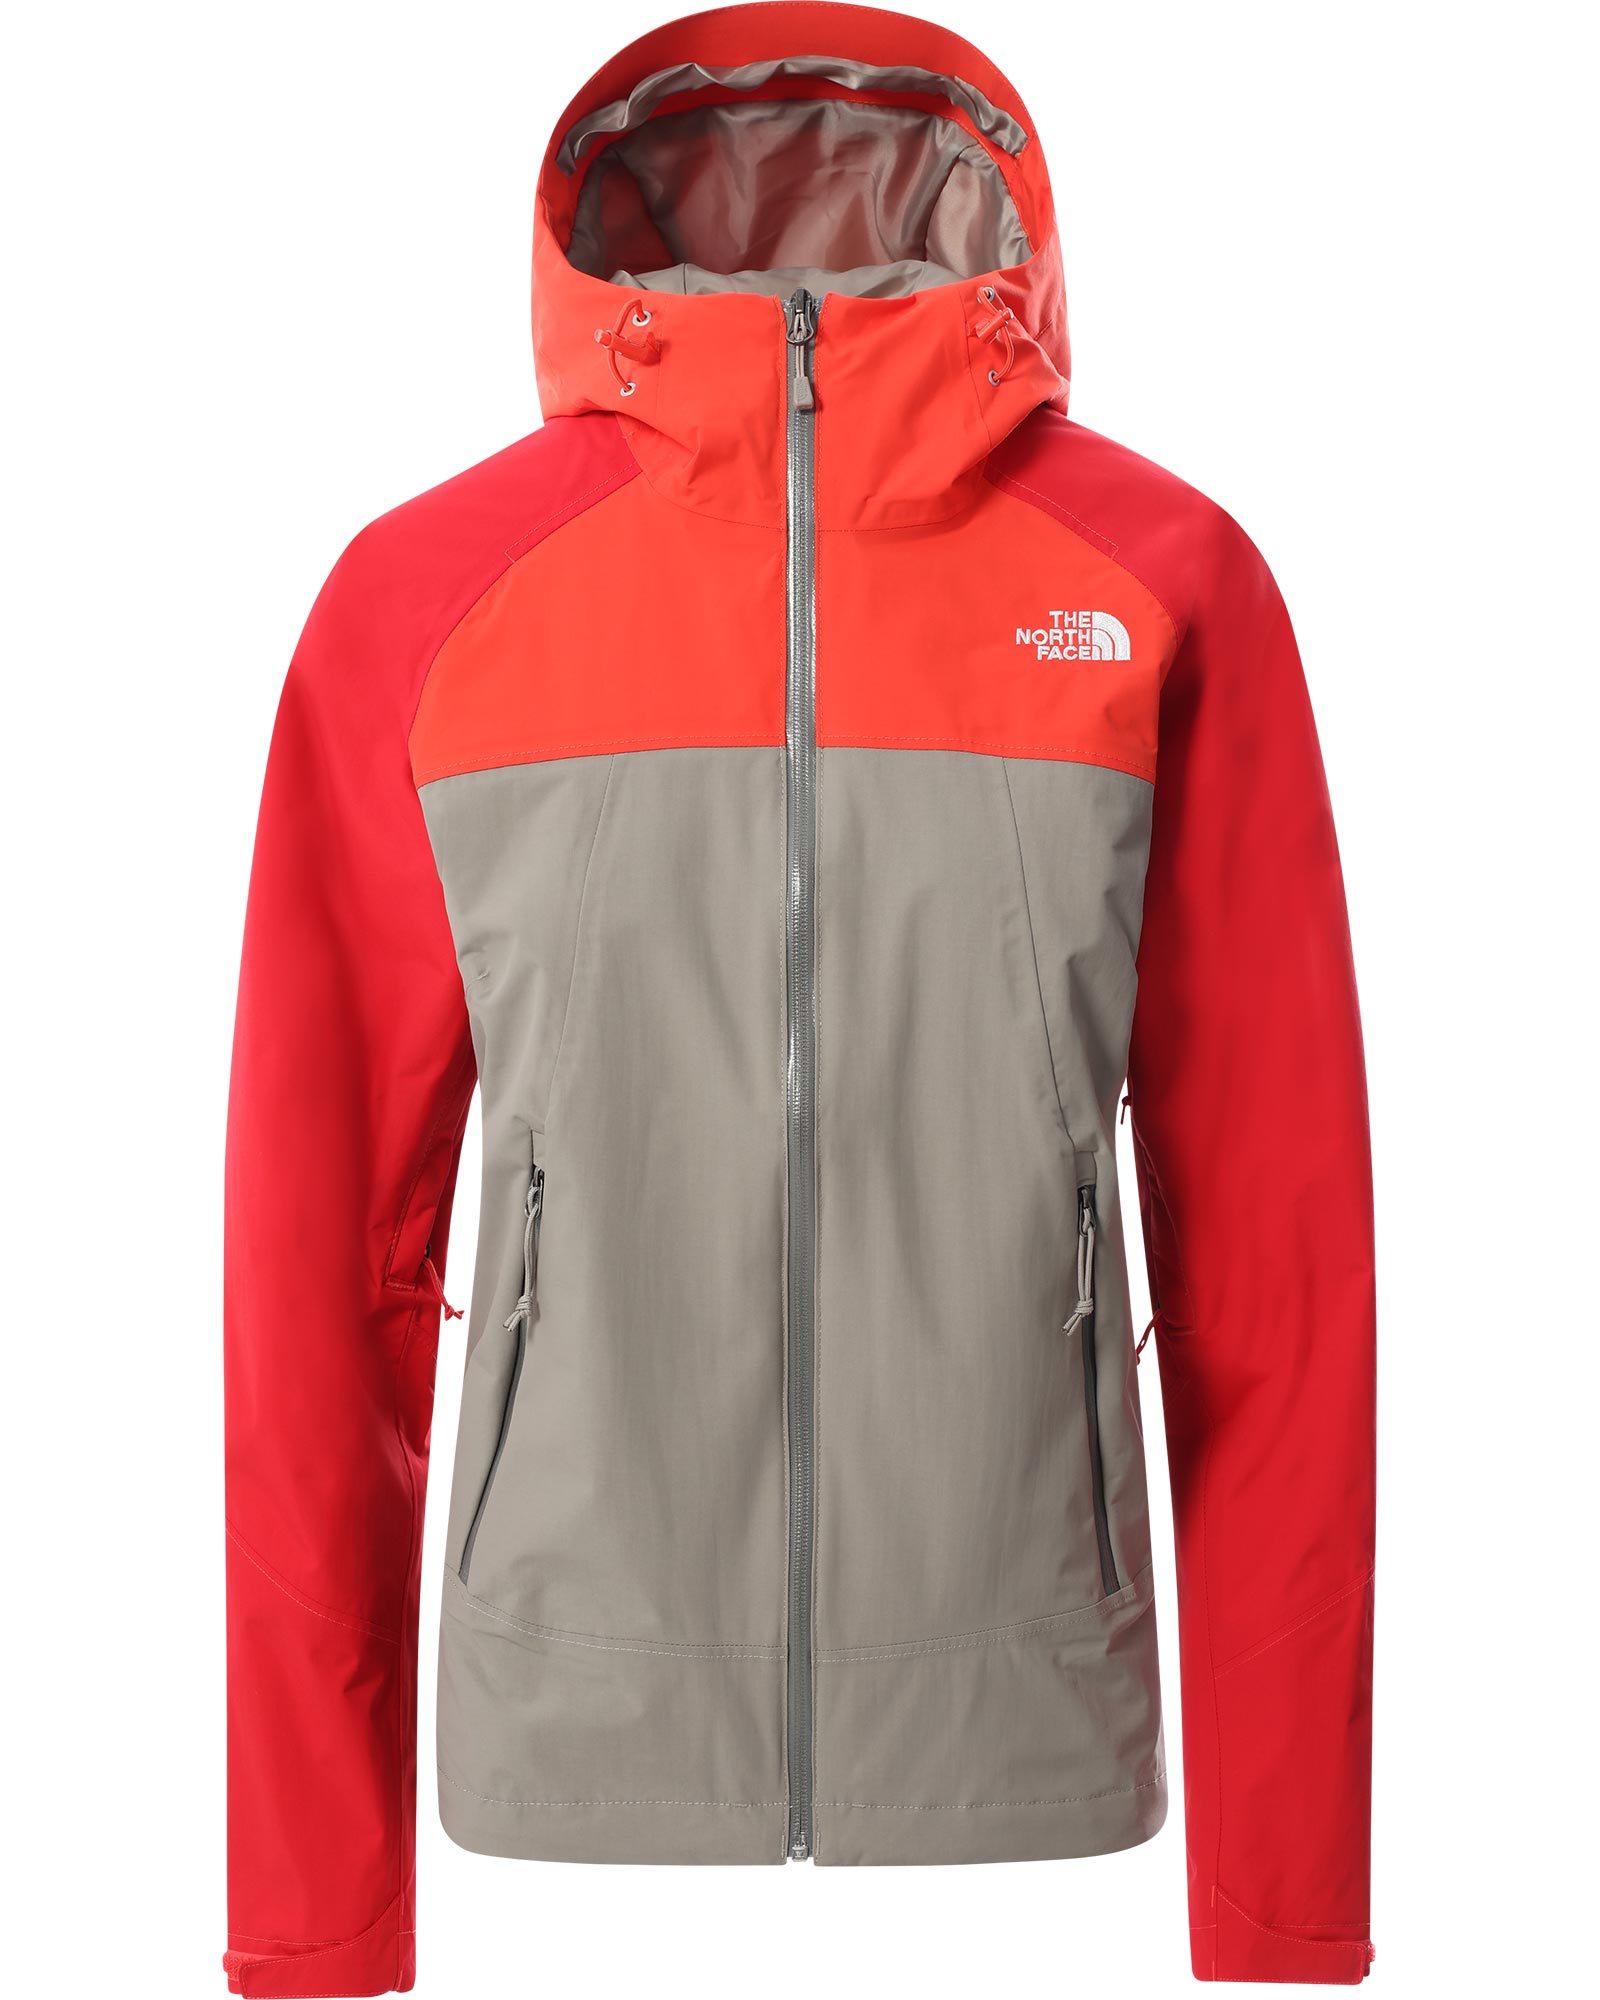 The North Face Stratos DryVent Women’s Jacket - Mineral Grey XS